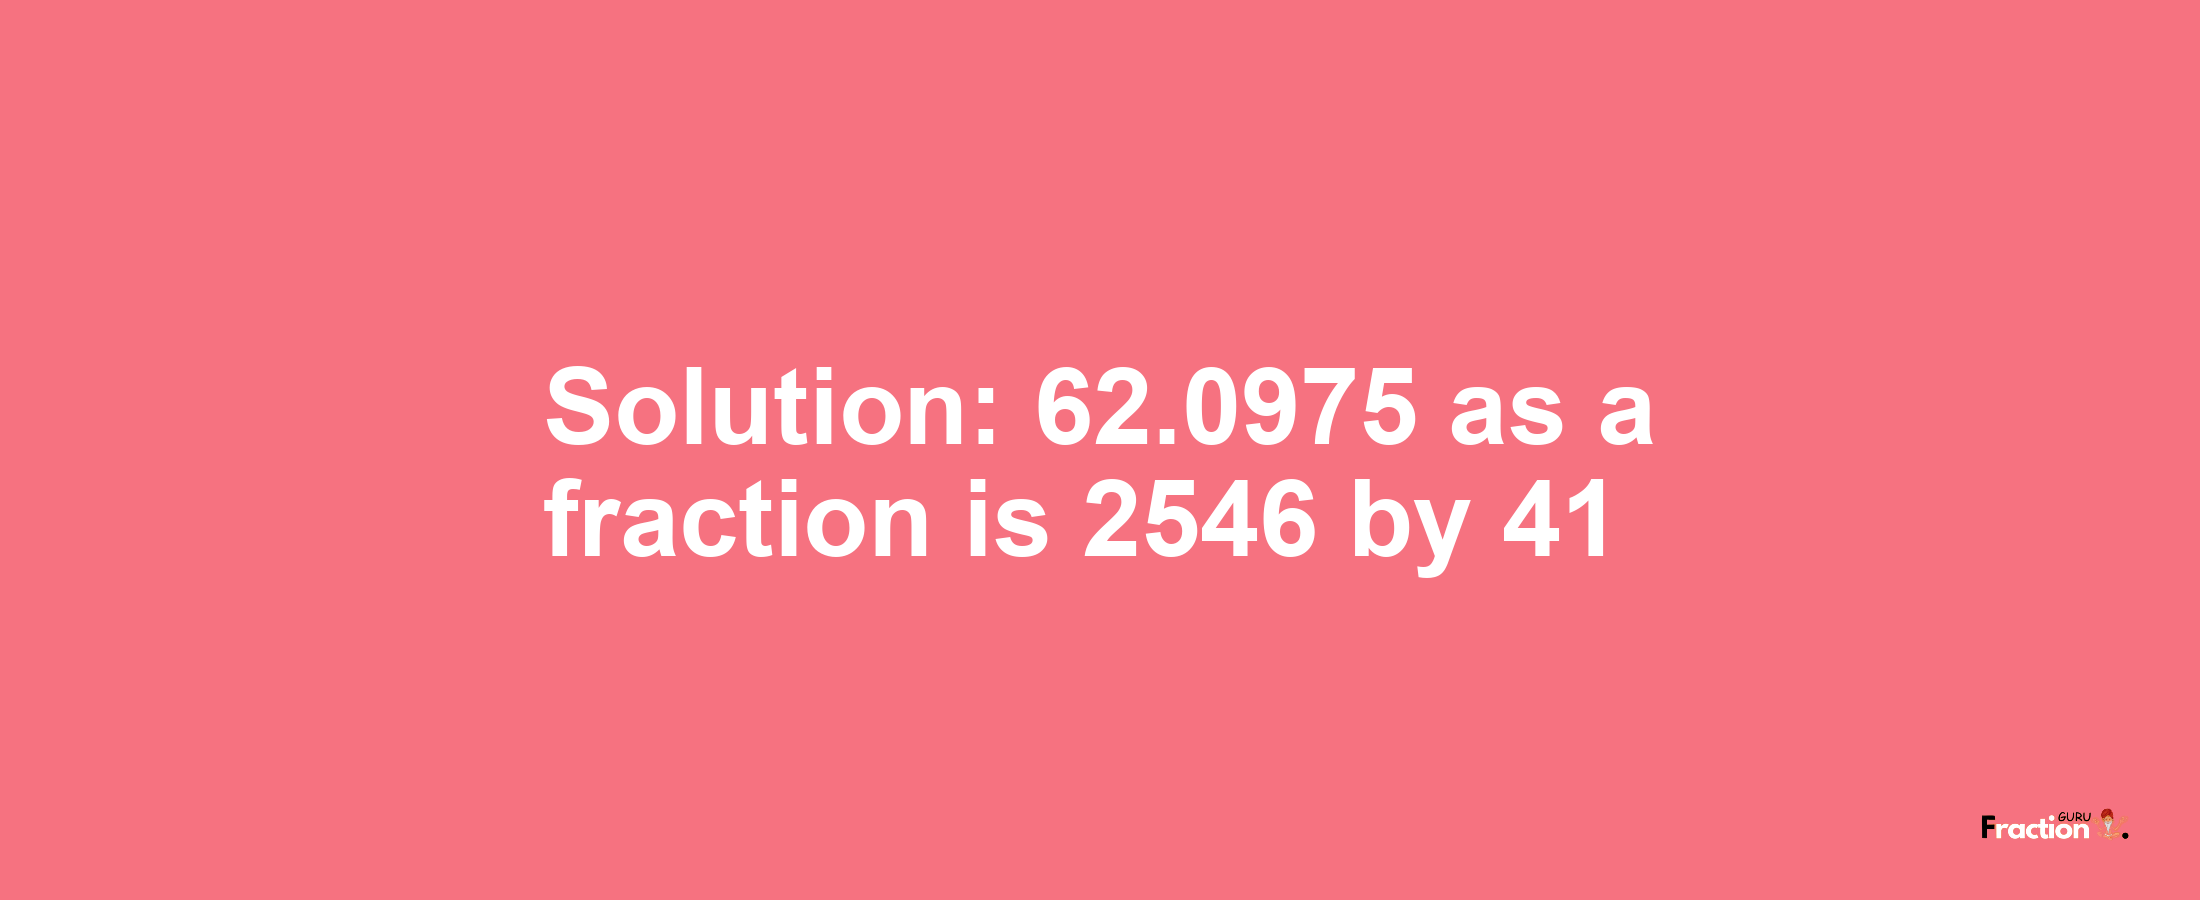 Solution:62.0975 as a fraction is 2546/41